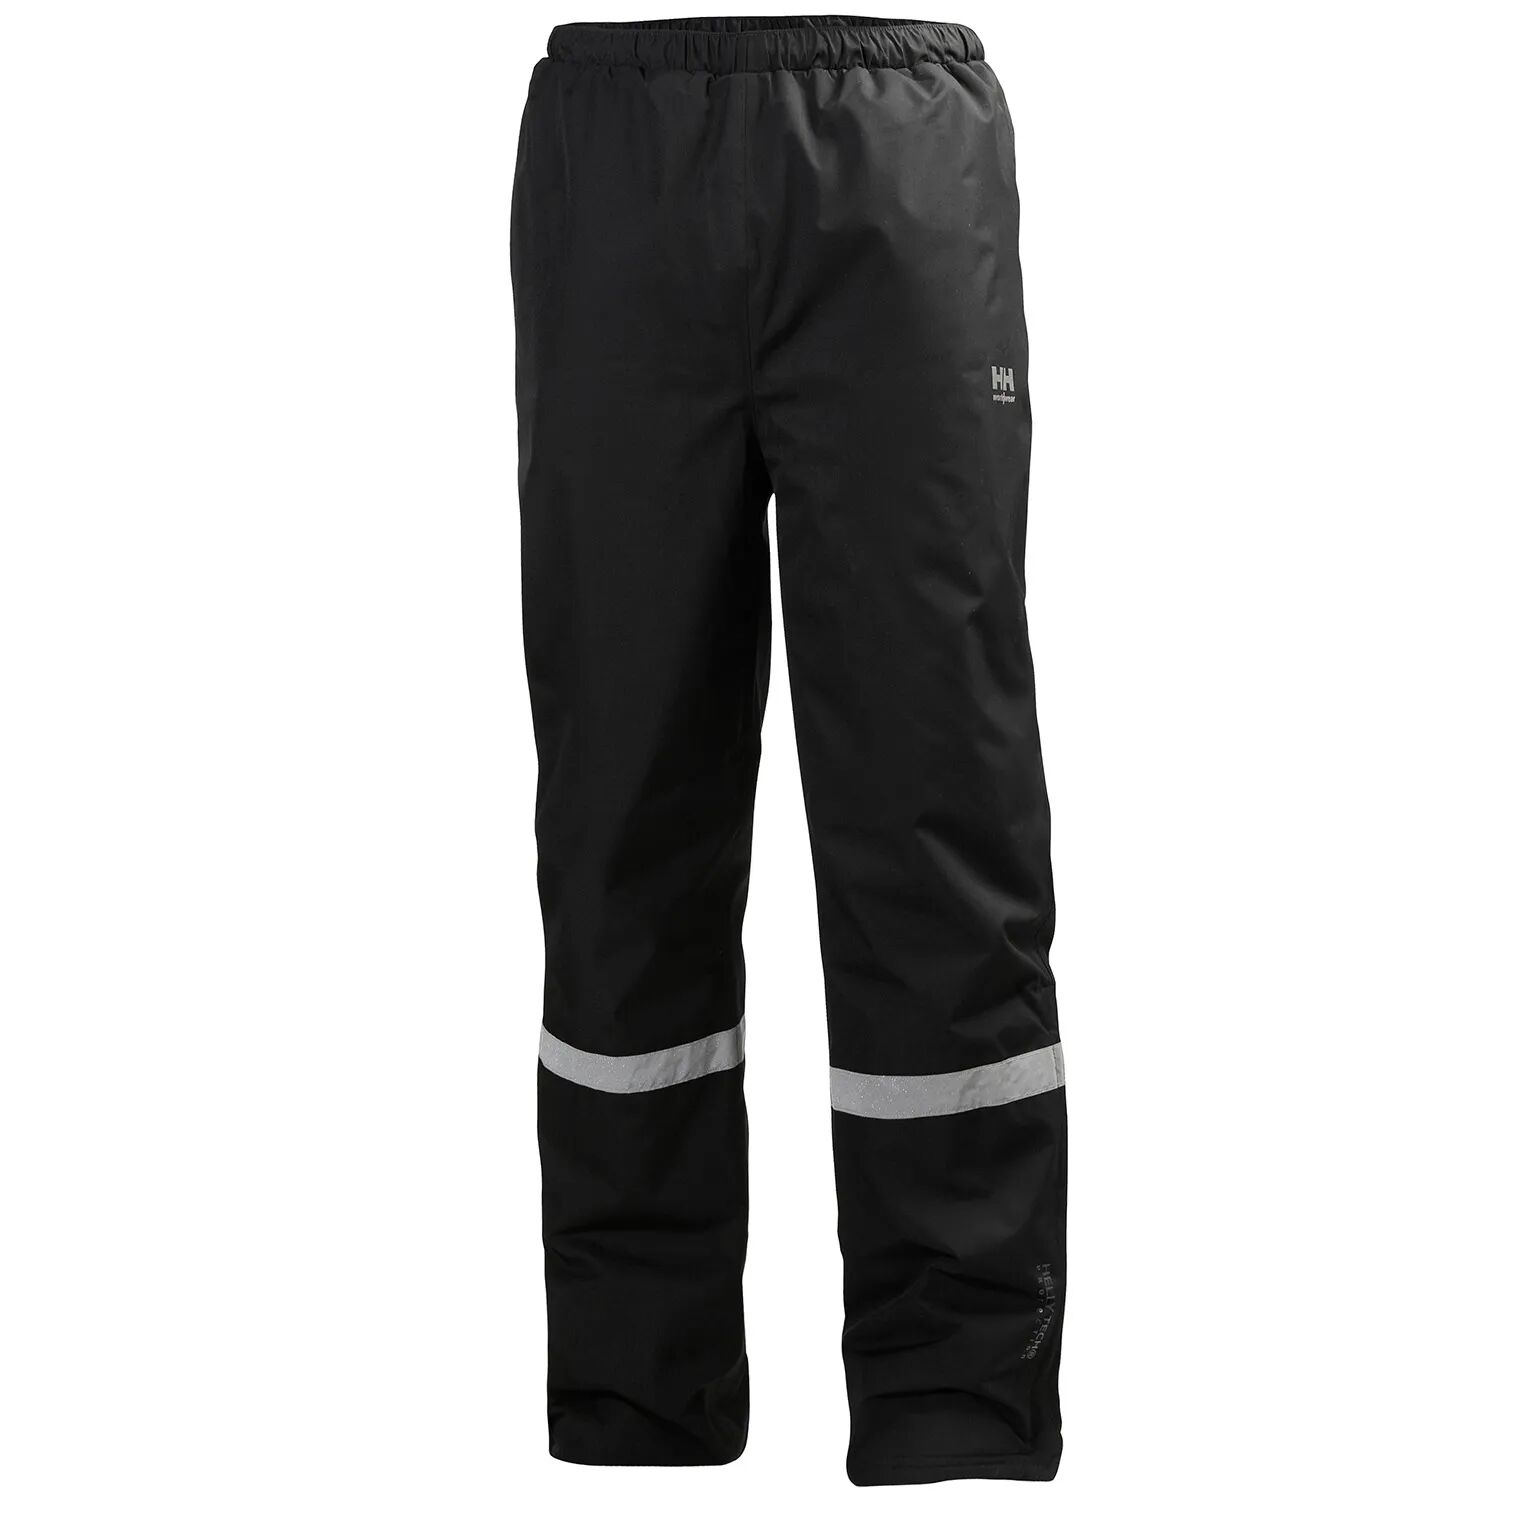 HH Workwear Helly Hansen WorkwearManchester Primaloft Insulated Protective Winter Pants Black XS